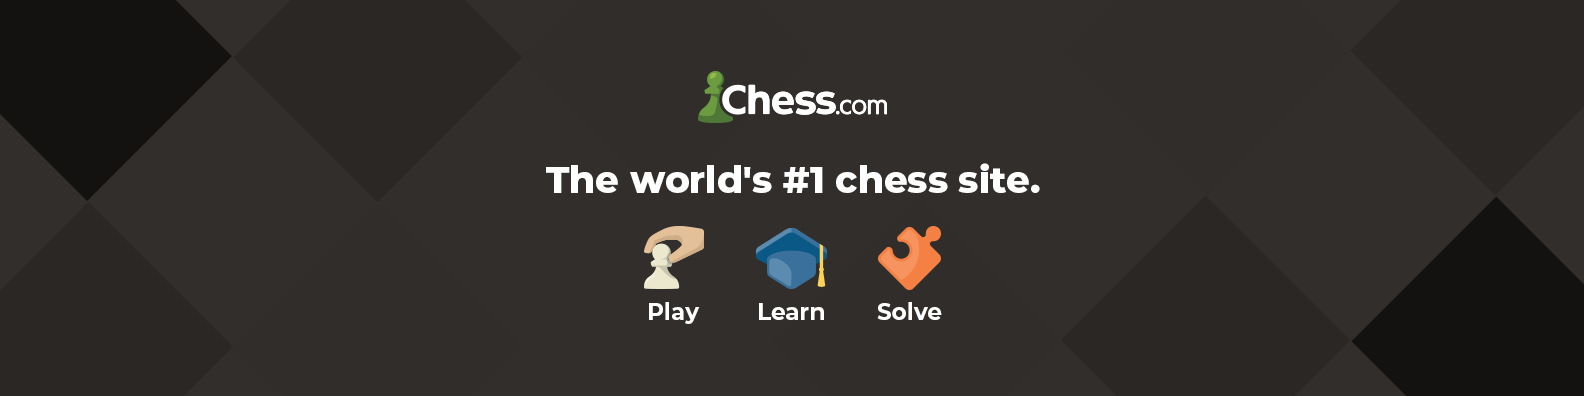 Best Chess Puzzle Ever?  Solve This If YOU Can! - Remote Chess Academy